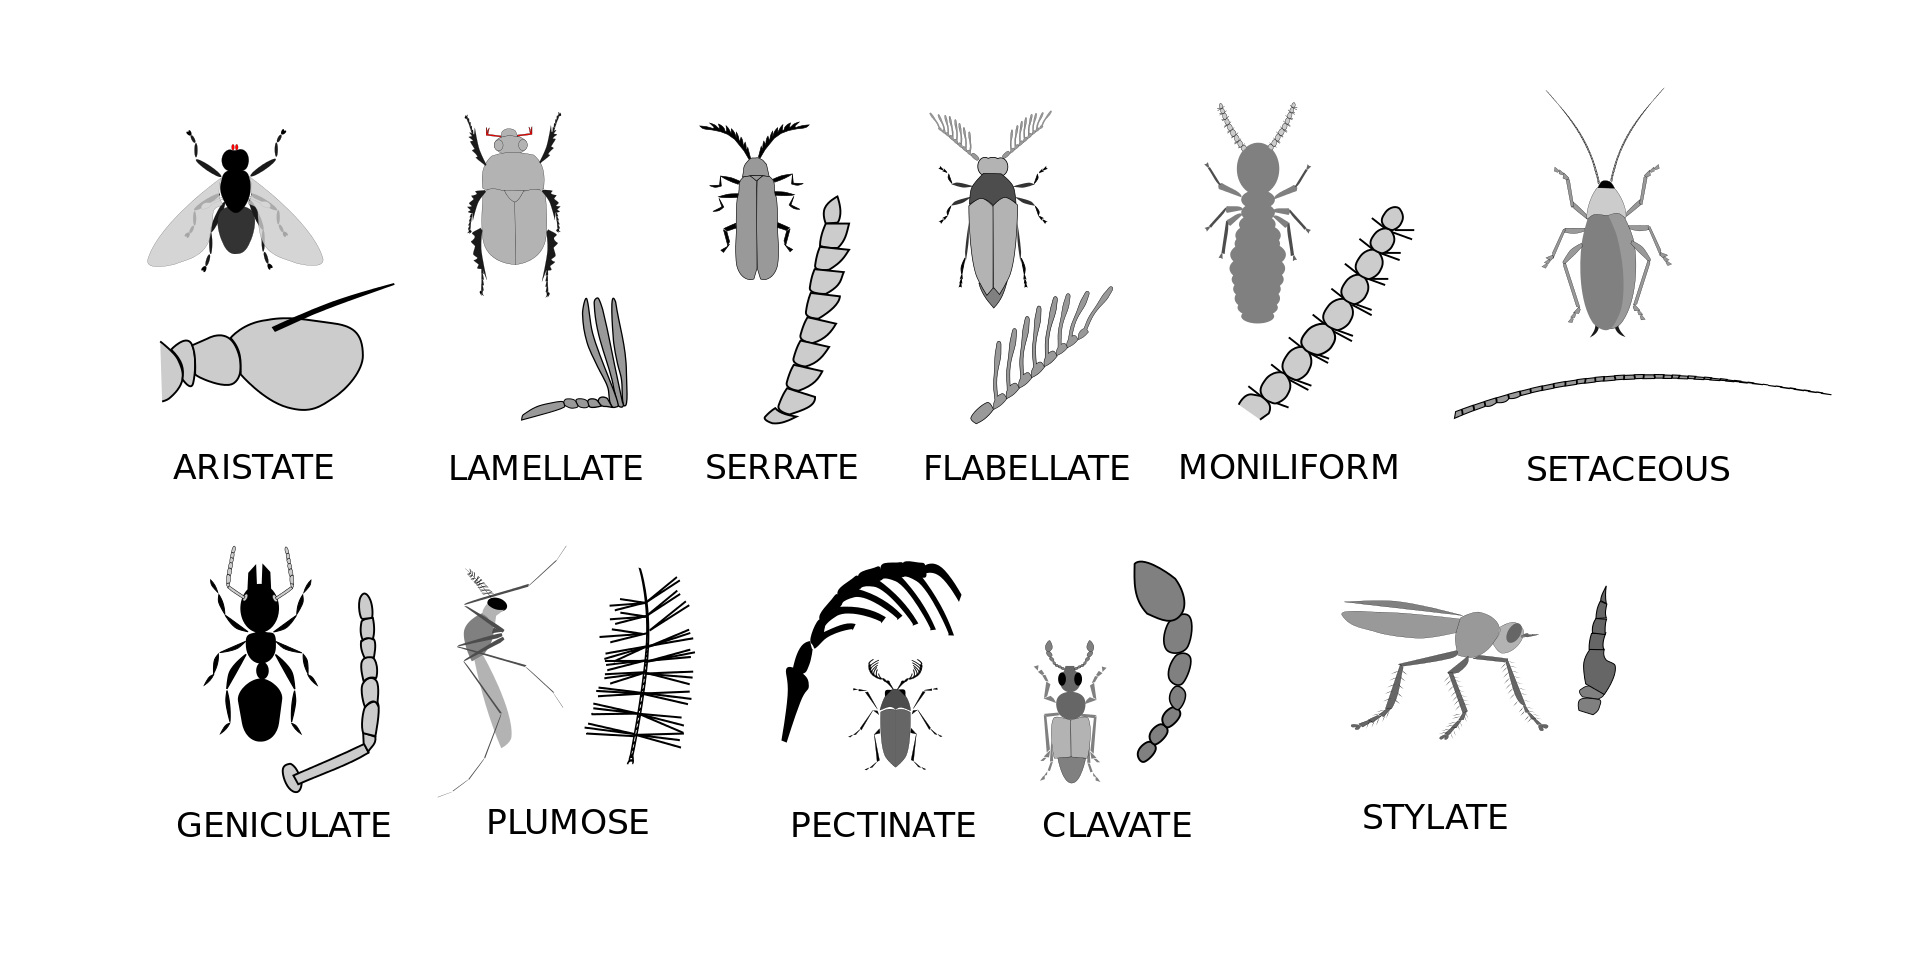 Picture describing shapes of insect antenna